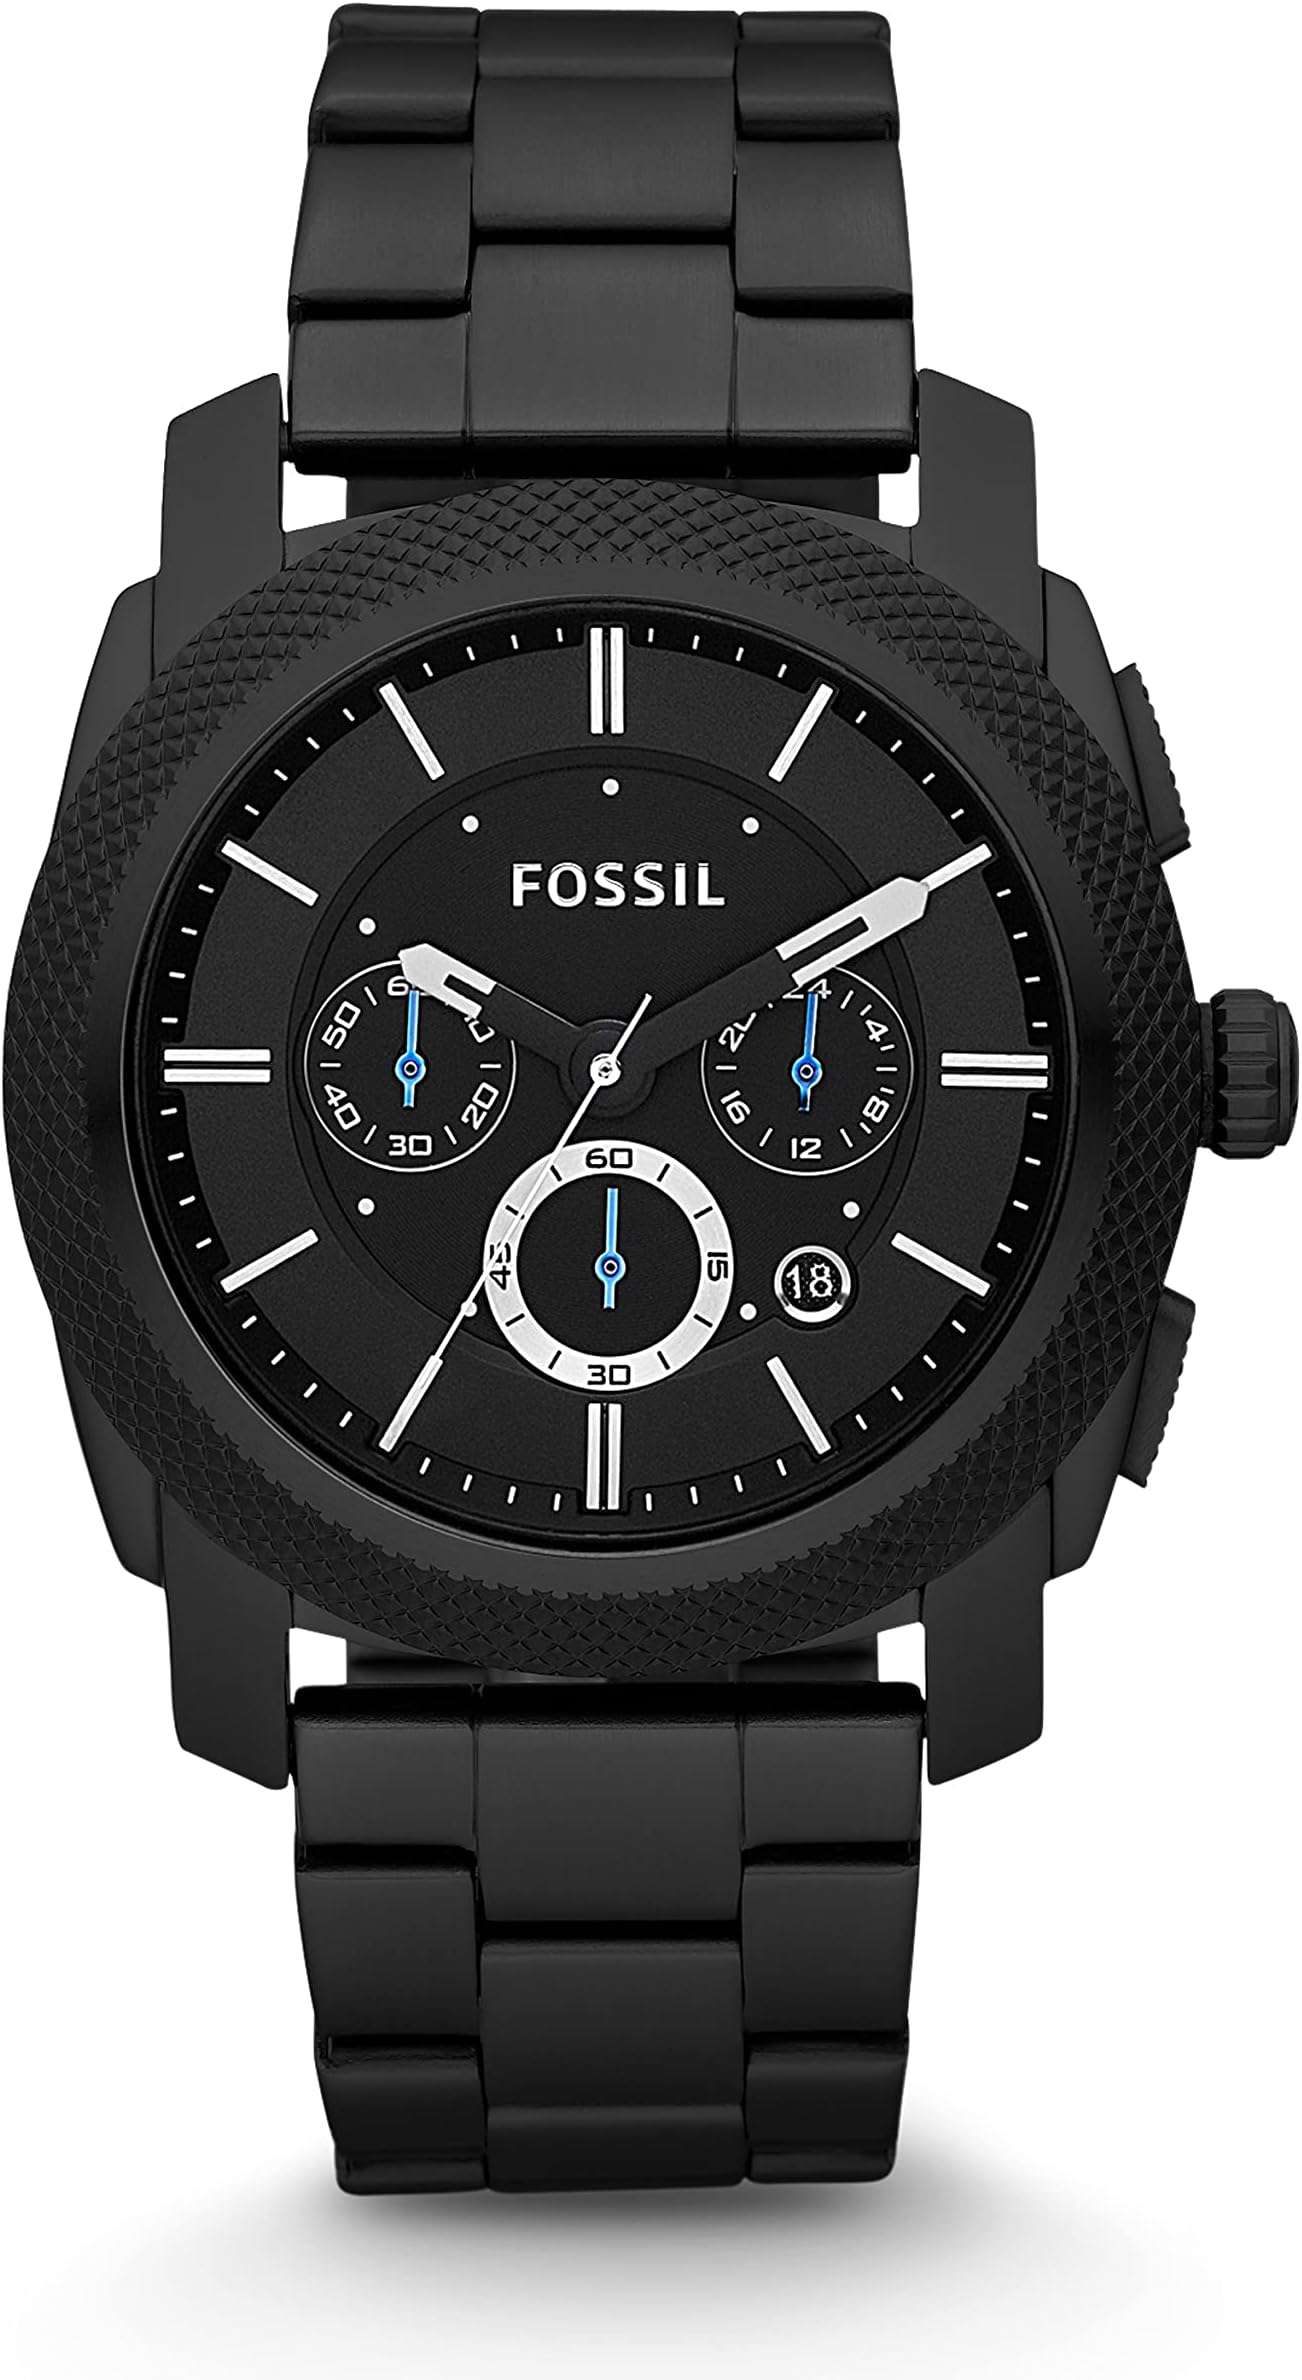 Часы Machine Chronograph Watch Fossil, цвет FS4552IE Black Stainless Steel sale promotion dental oral 2pcs photographic black background board 5pcs stainless steel mirror